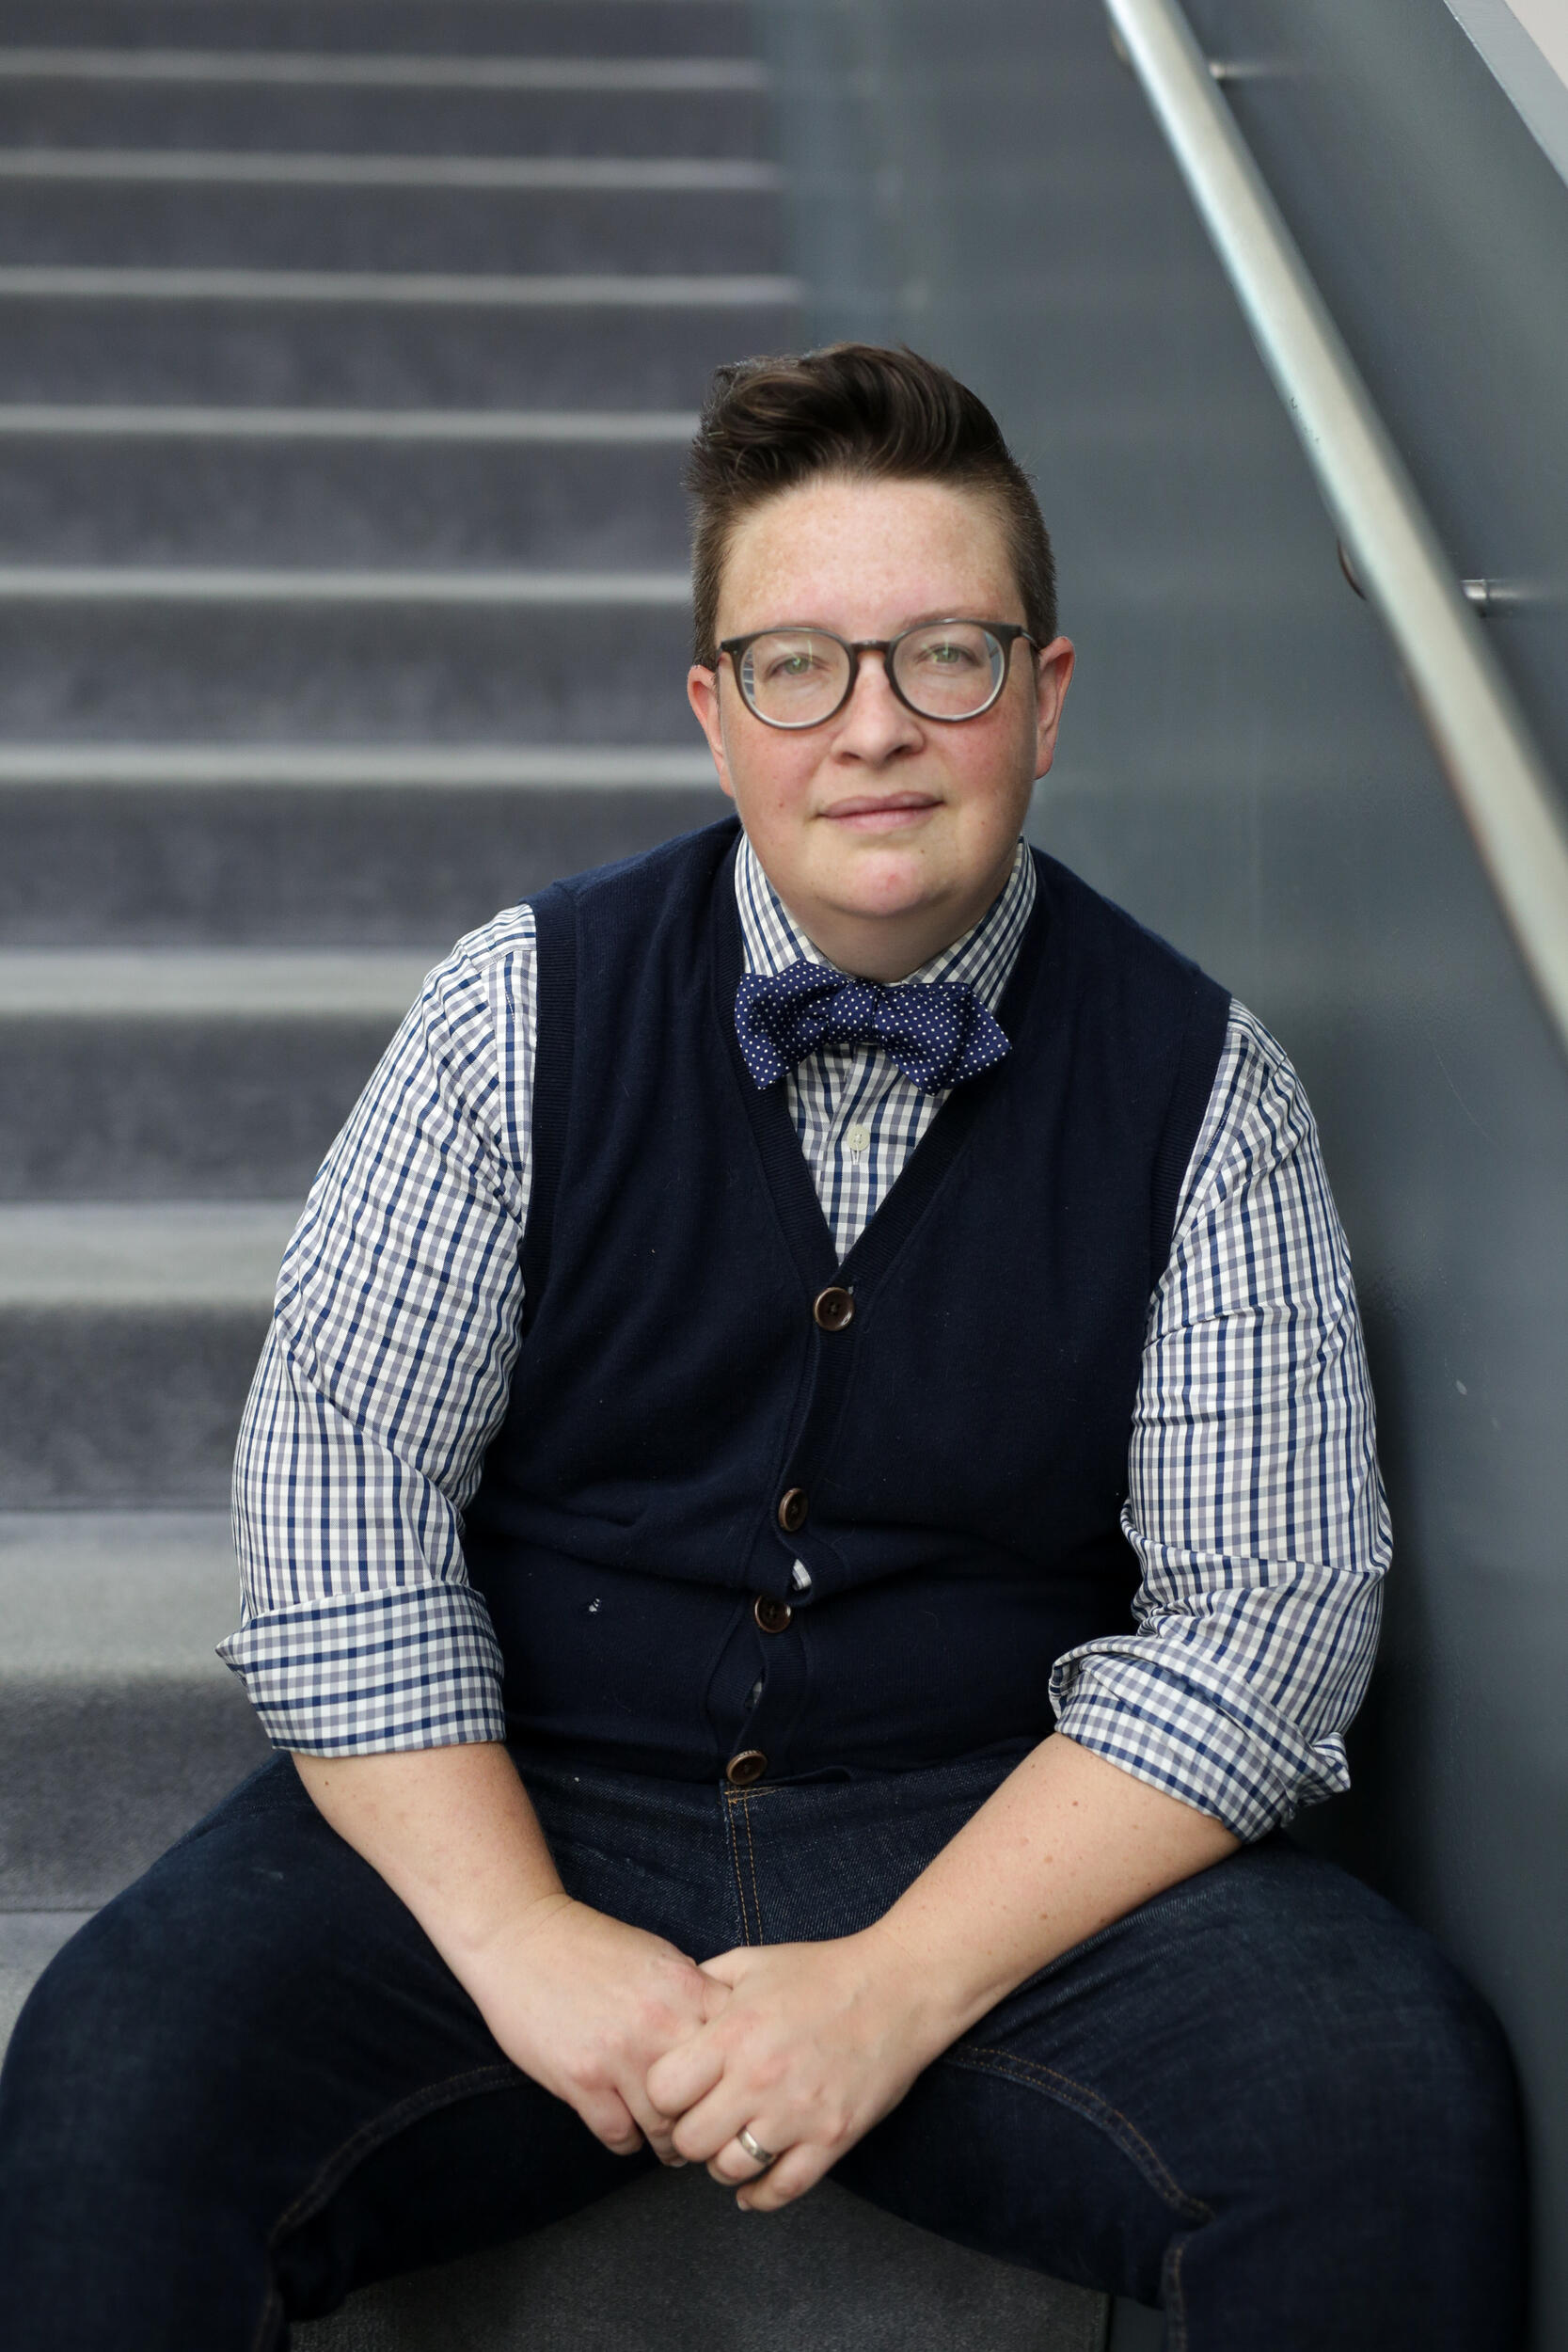 Person sitting on staircase wearing dark vest and bowtie.